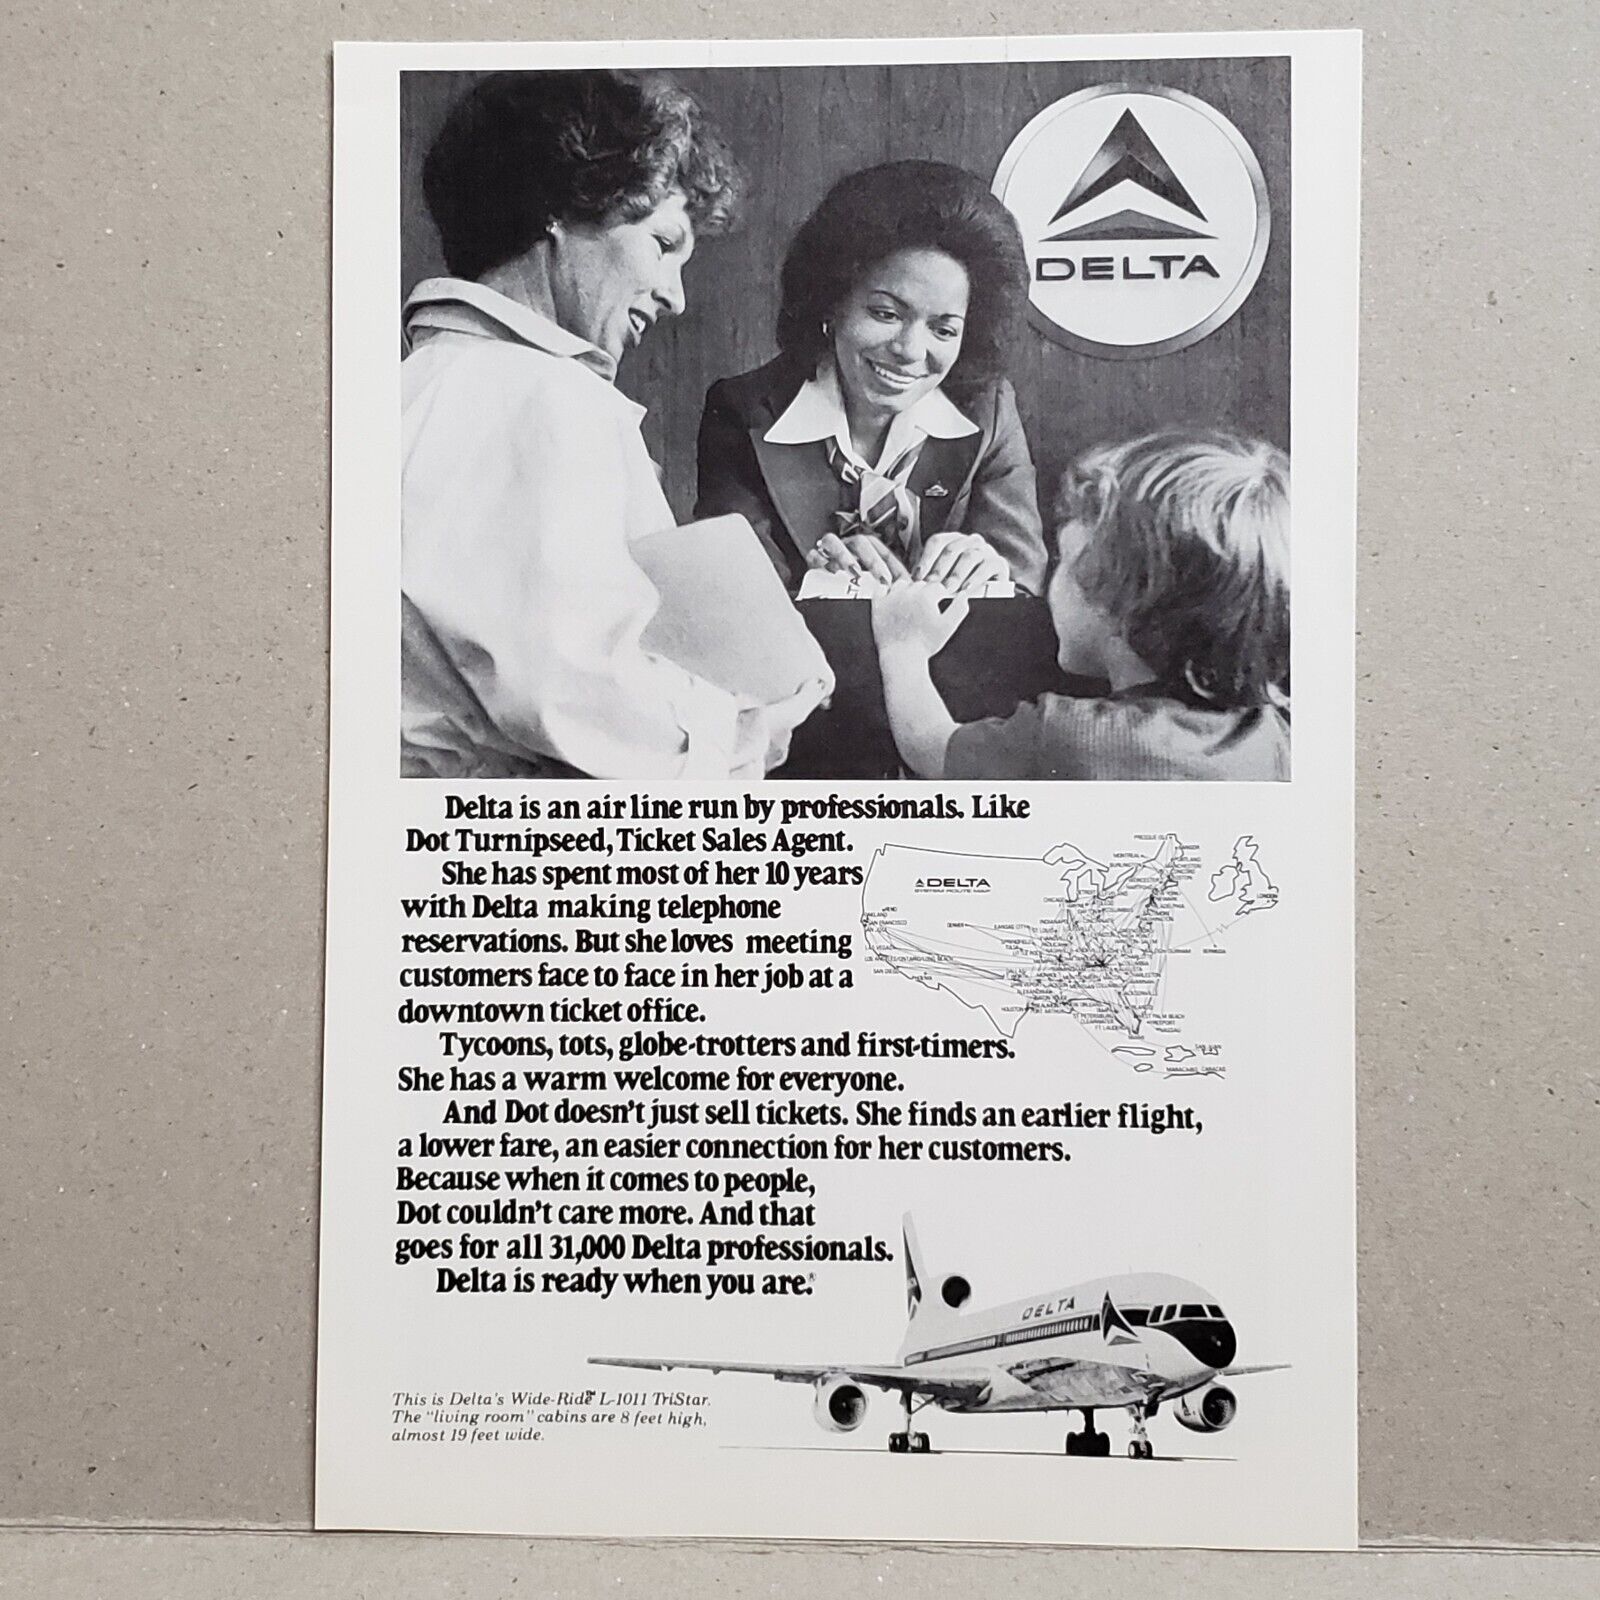 1978 Delta Airlines Print Ad Wide Ride L1011 TriStar Dot Turnipseed